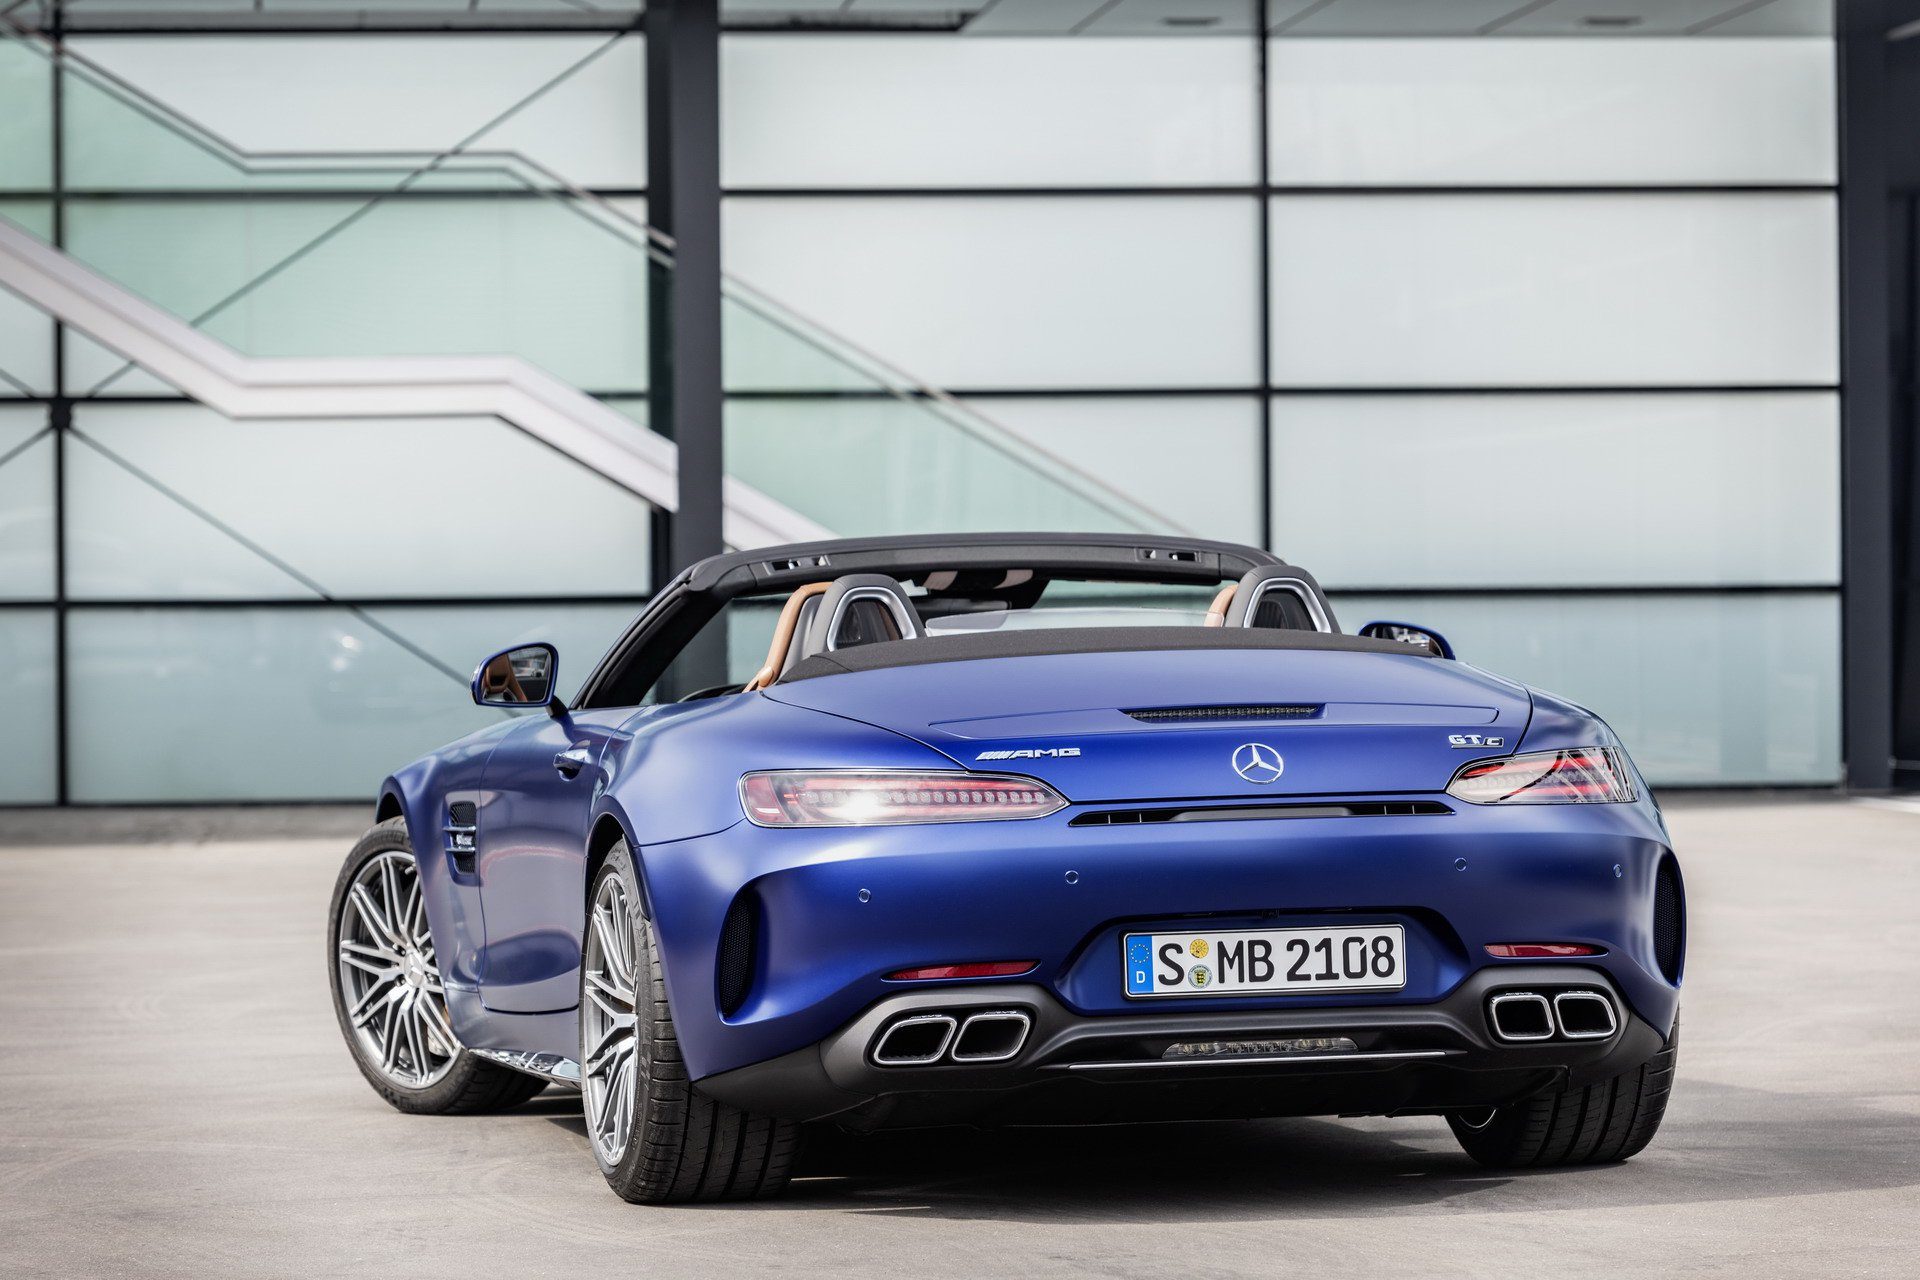 4cd2a818-2020-mercedes-amg-gt-and-amg-gt-r-pro-28.jpg